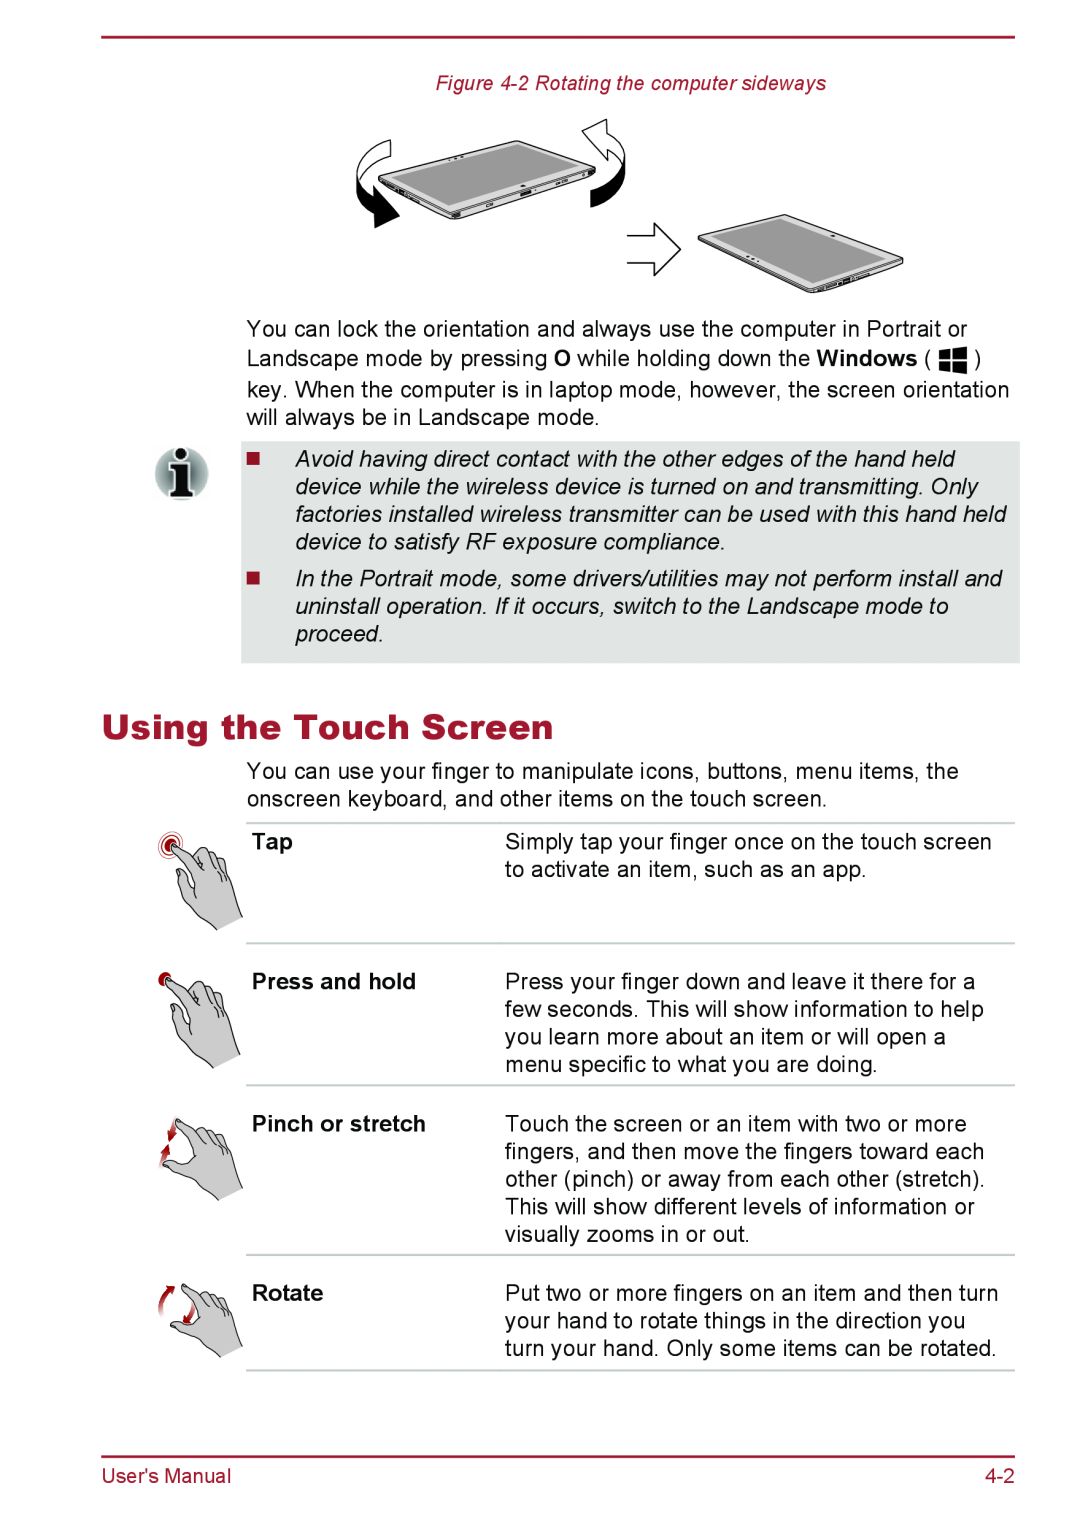 Toshiba L30W-B, L35W-B user manual Using the Touch Screen, Press and hold, Pinch or stretch, Rotate 